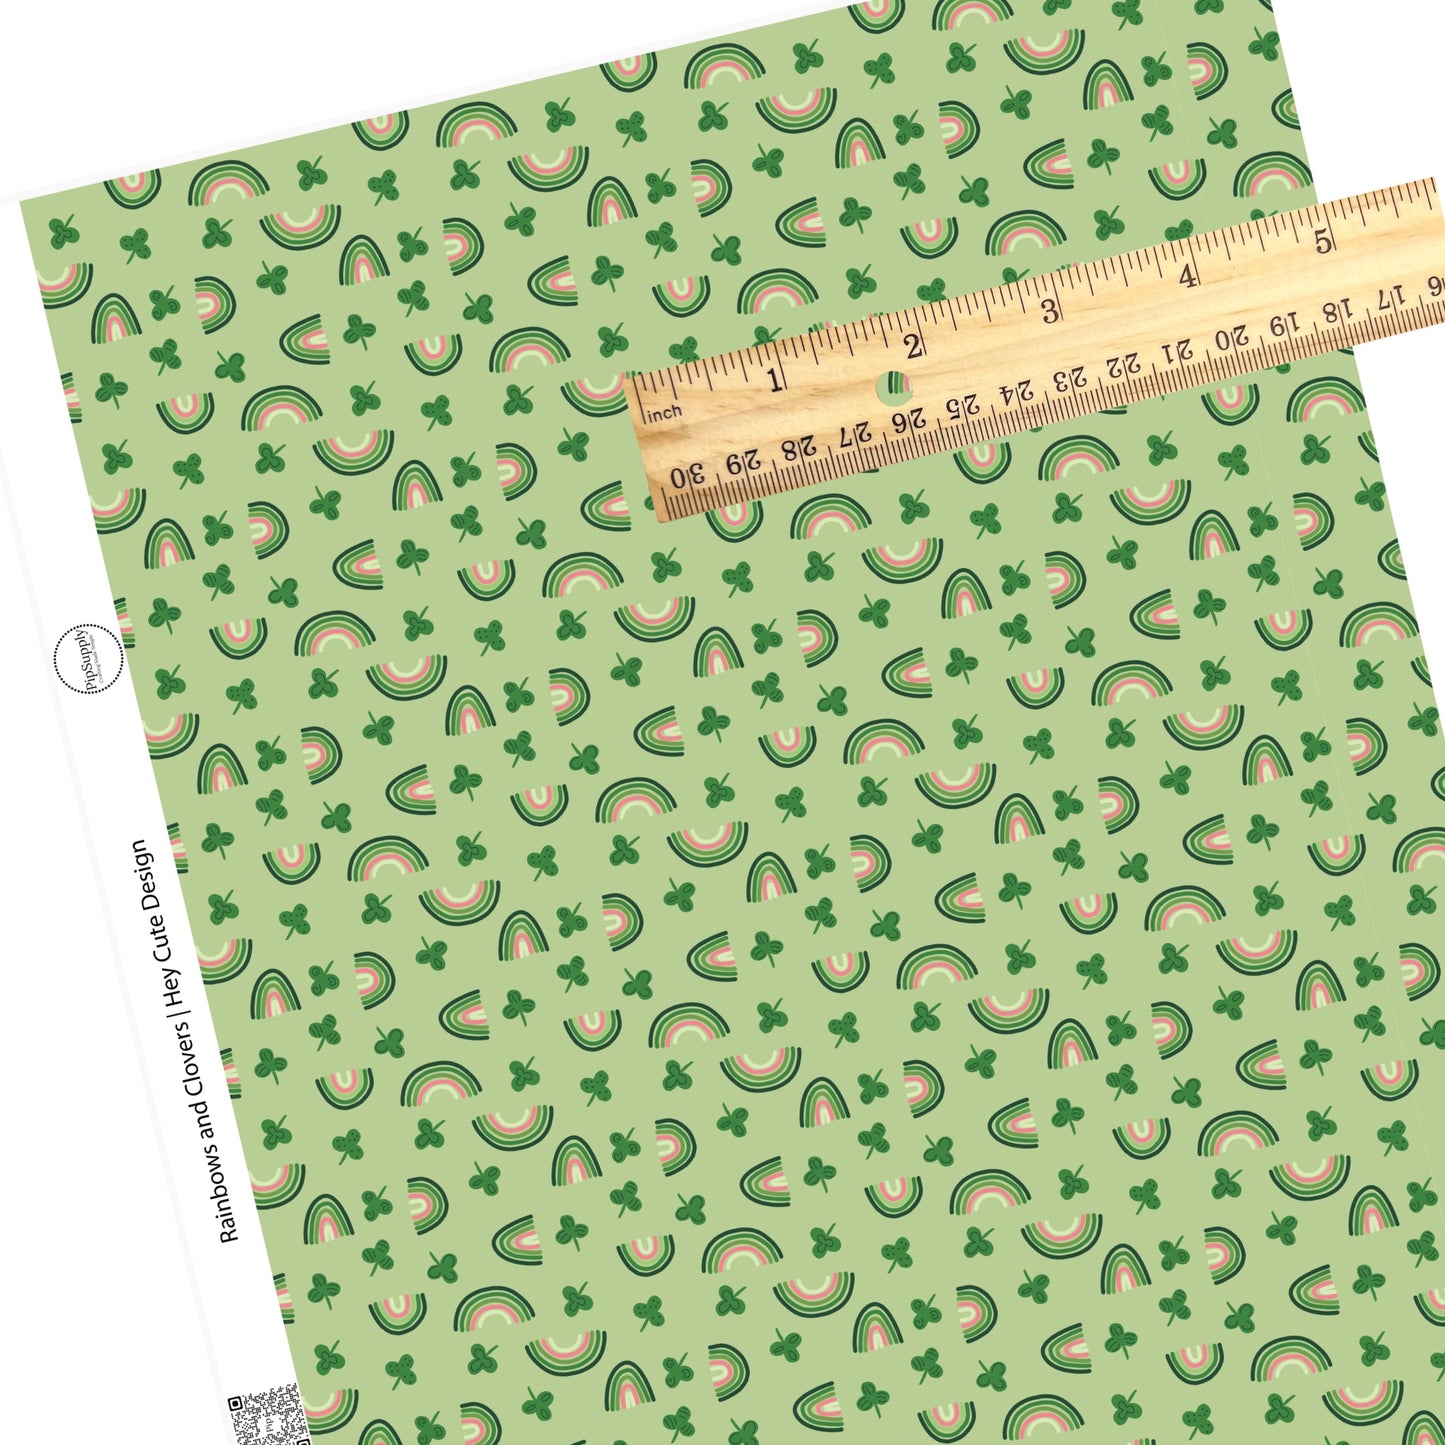 Disperse polka dot clovers with pink and different shades of green rainbows on a green faux leather sheet